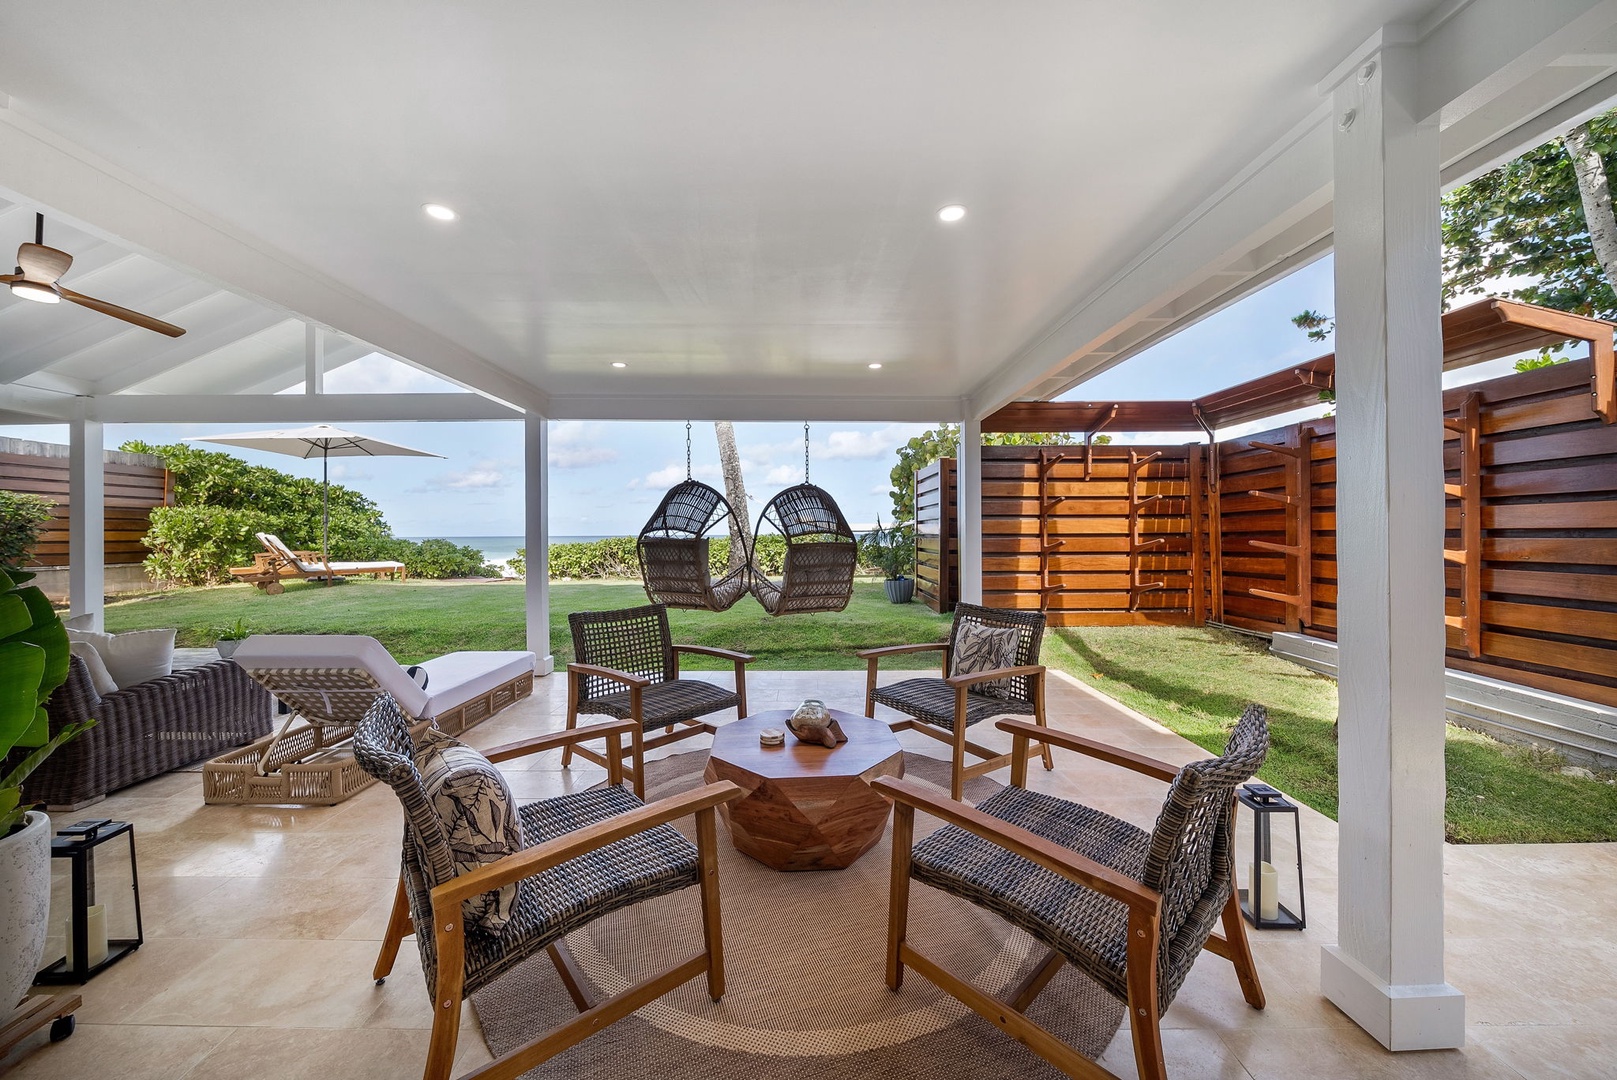 Haleiwa Vacation Rentals, Hale Nalu - Lanai area with seating around the fire pit